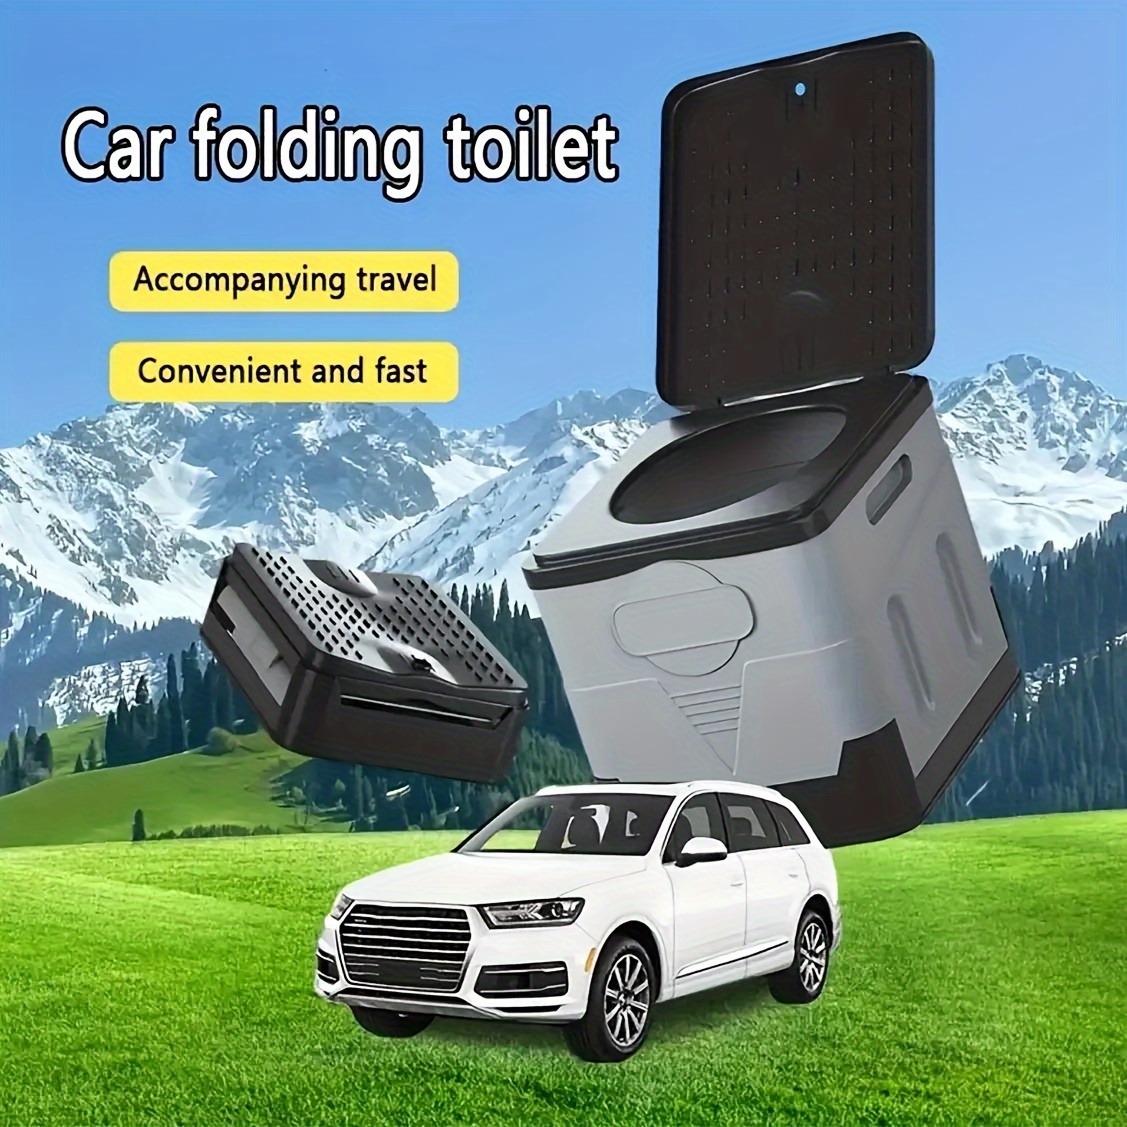 

1pc Portable Plastic Folding Toilet, Lightweight And Compact, Snap-on Design With Secure Buckle, Easy To Open, Ideal For Outdoor Use, Camping, Fishing, Travel, And Traffic Jams